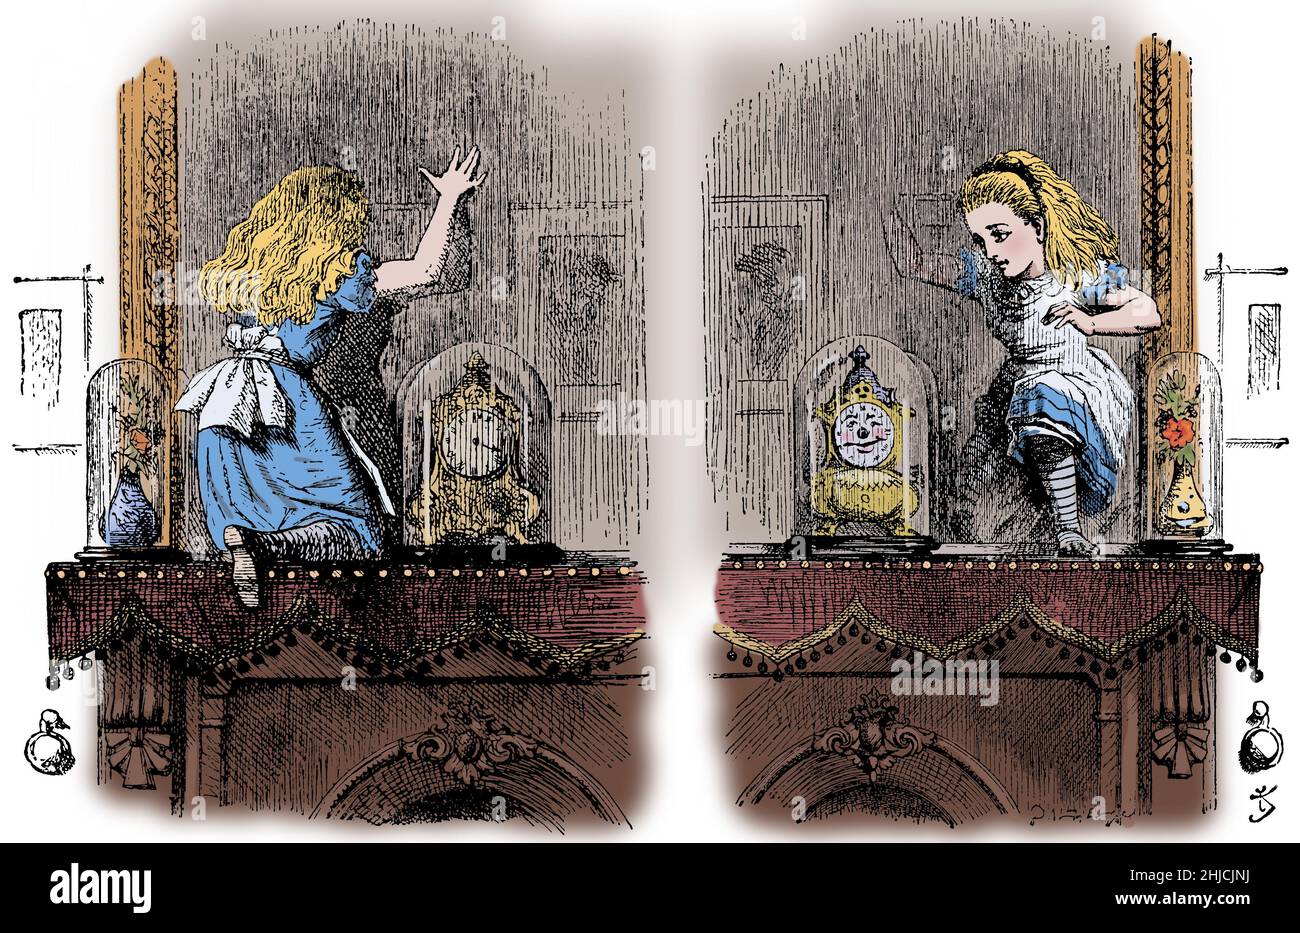 Through the Looking-Glass, and What Alice Found There (1871) is a novel by Lewis Carroll. Climbing up onto the fireplace mantel, she pokes at the wall-hung mirror behind the fireplace and discovers, to her surprise, that she is able to step through it to an alternative world.  John Tenniel (February 28, 1820 - February 25, 1914) was an English illustrator, graphic humorist, and political cartoonist. Stock Photo